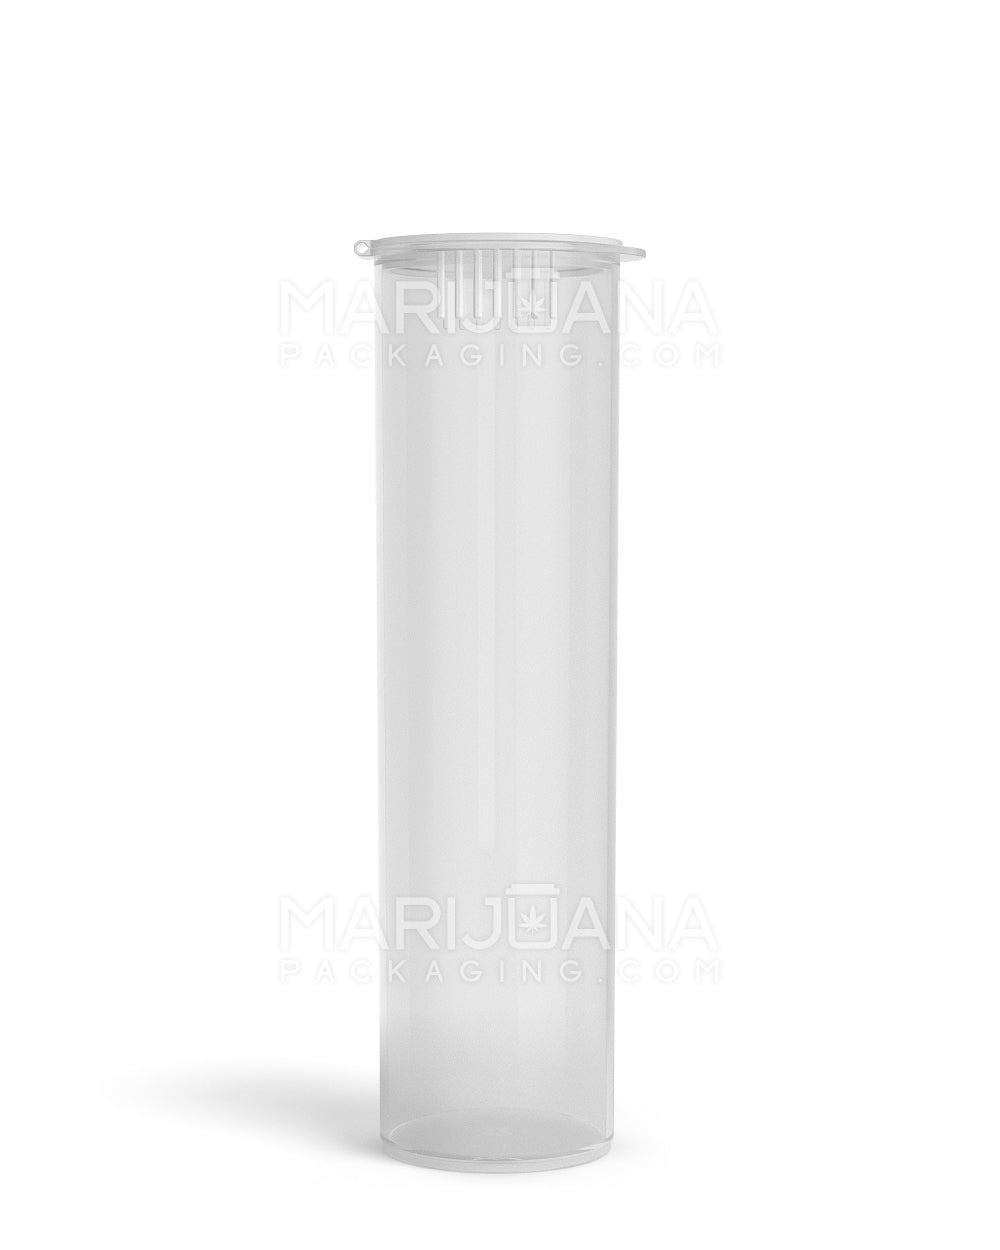 Child Resistant | King Size Pop Top Wide Multi-Joint Plastic Pre-Roll Tubes | 116mm - Clear - 250 Count